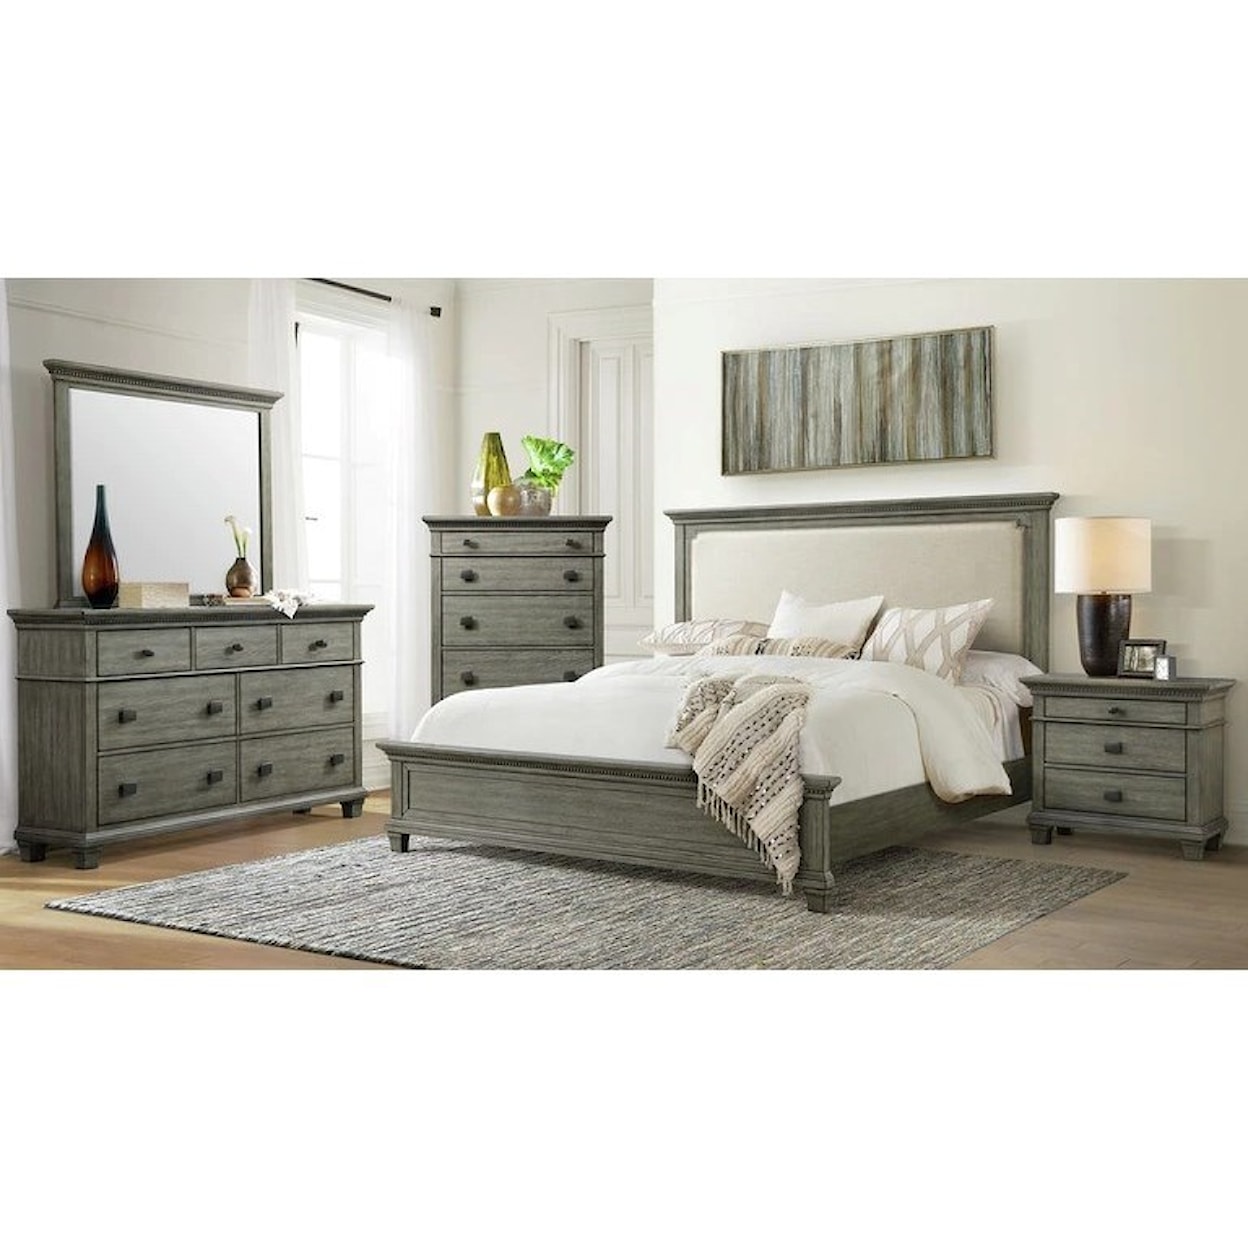 Elements International Crawford CW Queen Panel Bed